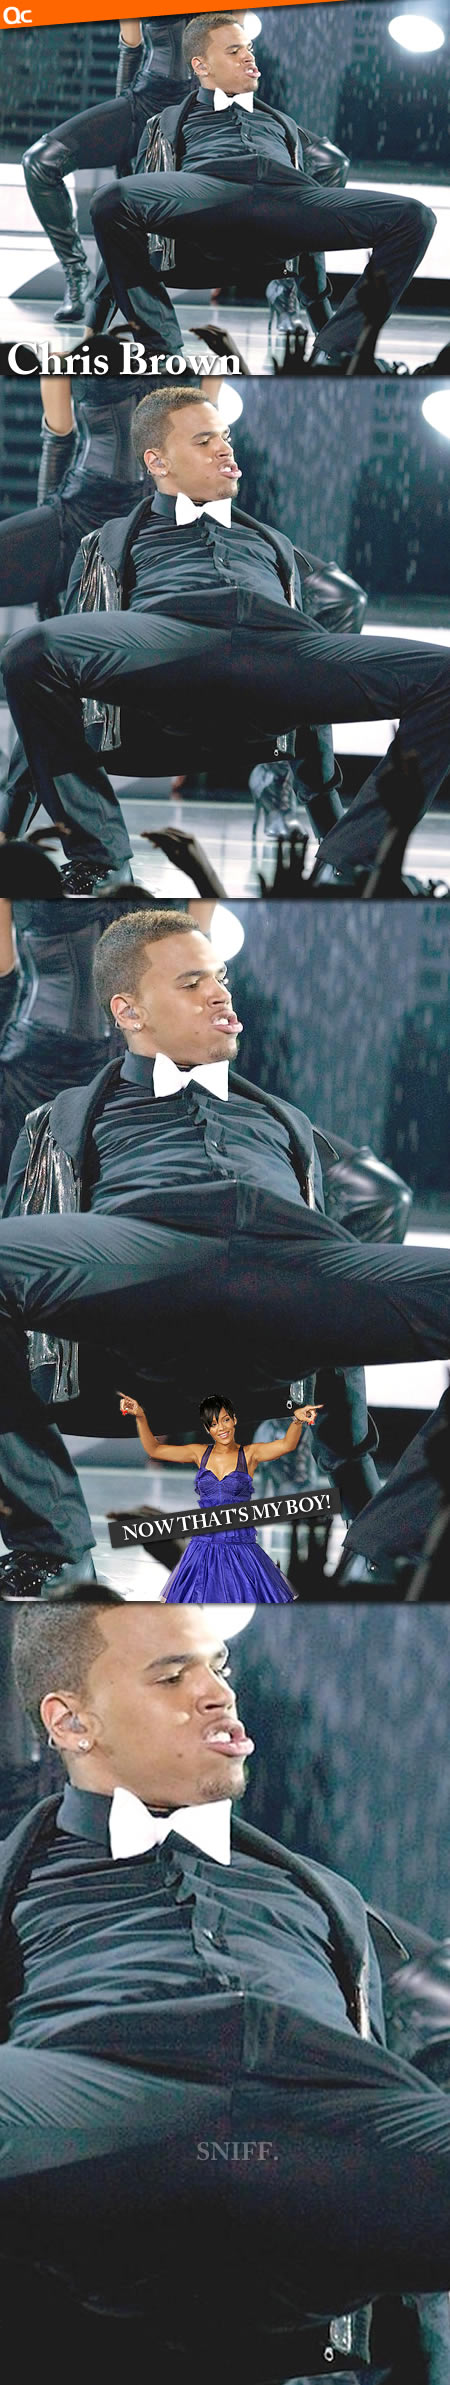 Chris Brown Spreading His Man Thighs